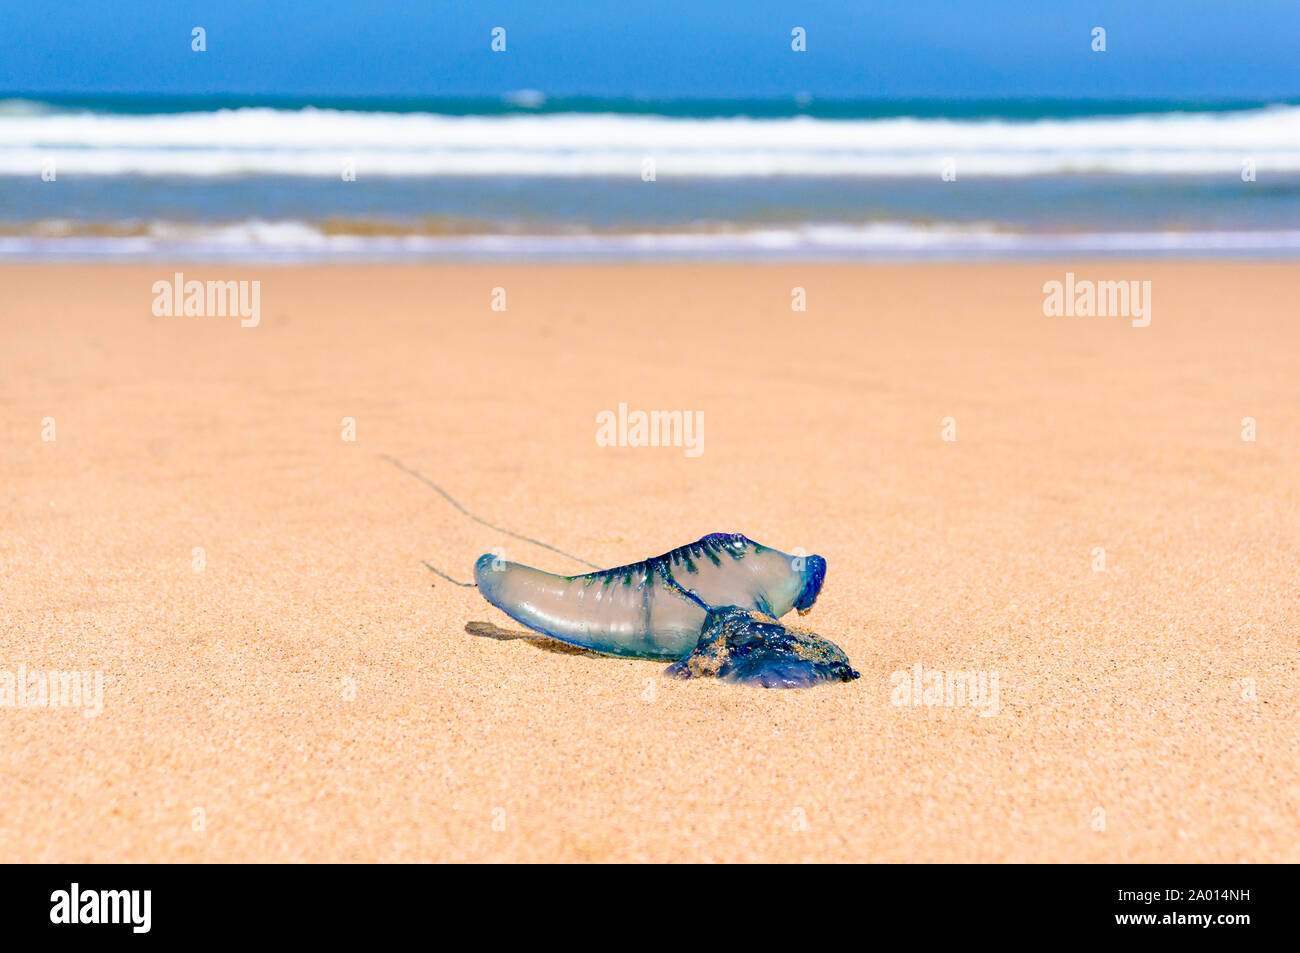 Close up of blue bottle, Portuguese man of war, or floating terror jelly fish on sandy shore with ocean on the background Stock Photo